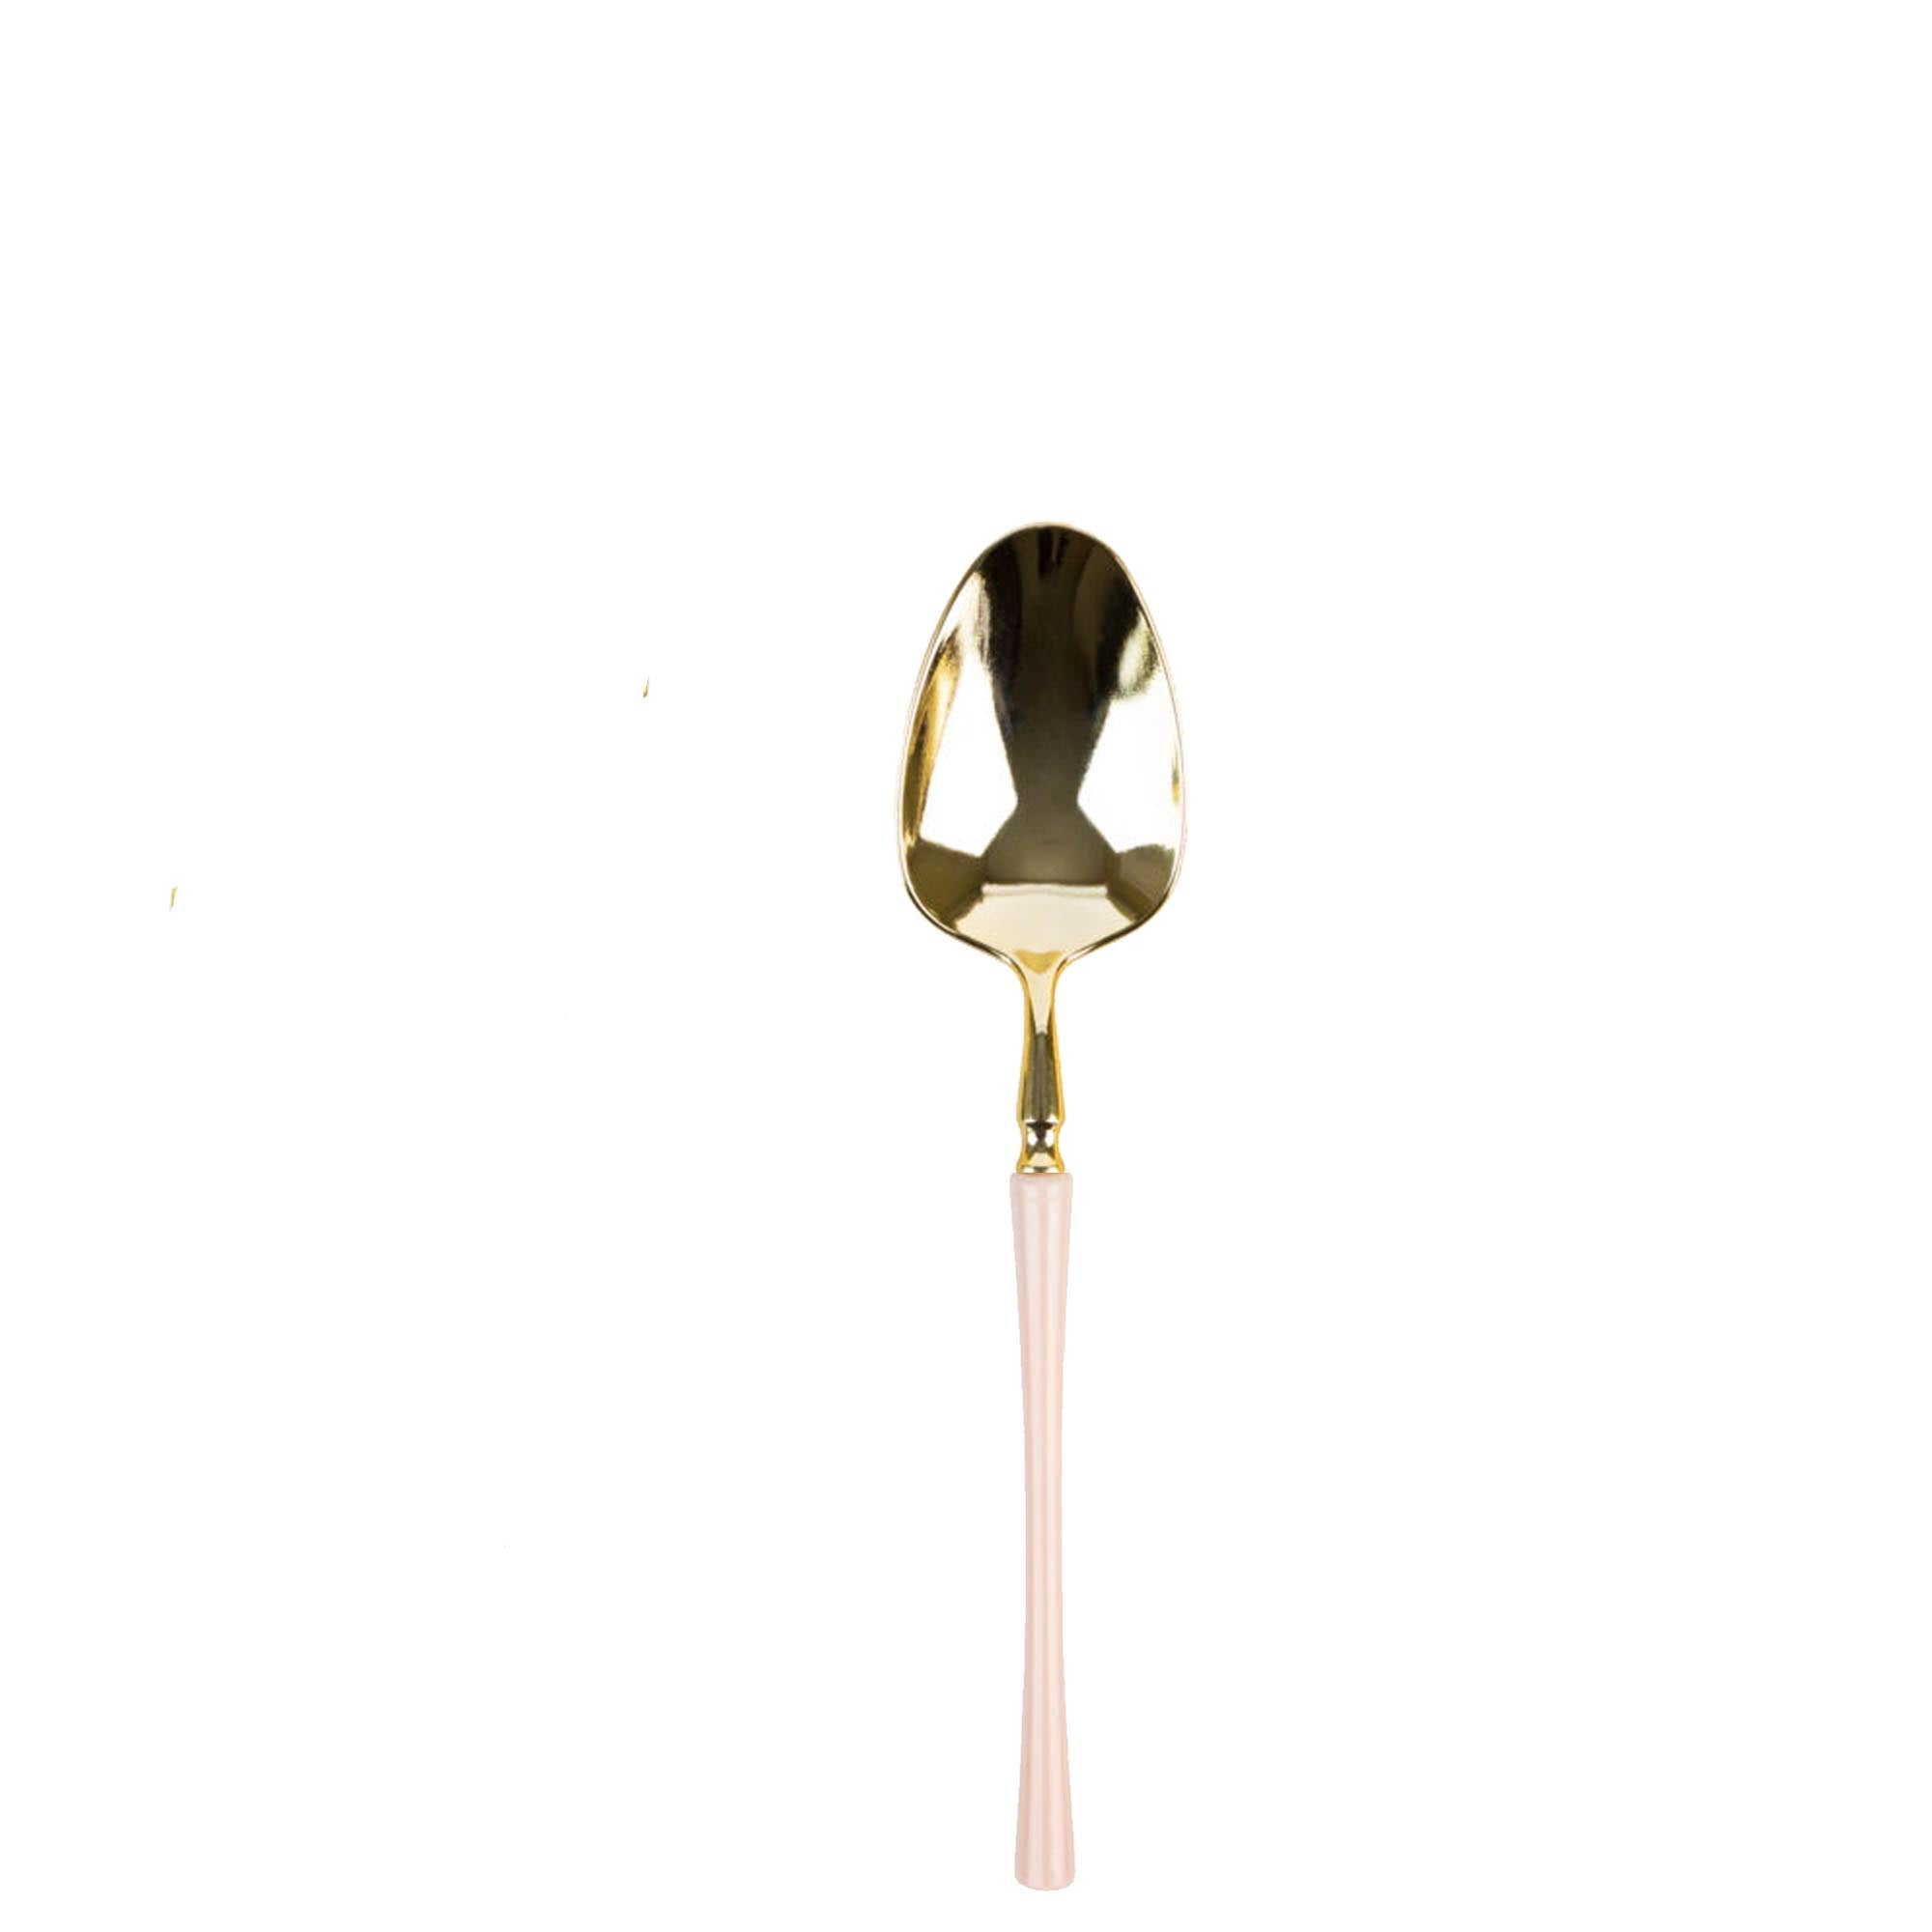 Plastic Tea Spoons Pink and Gold Infinity Flatware Collection